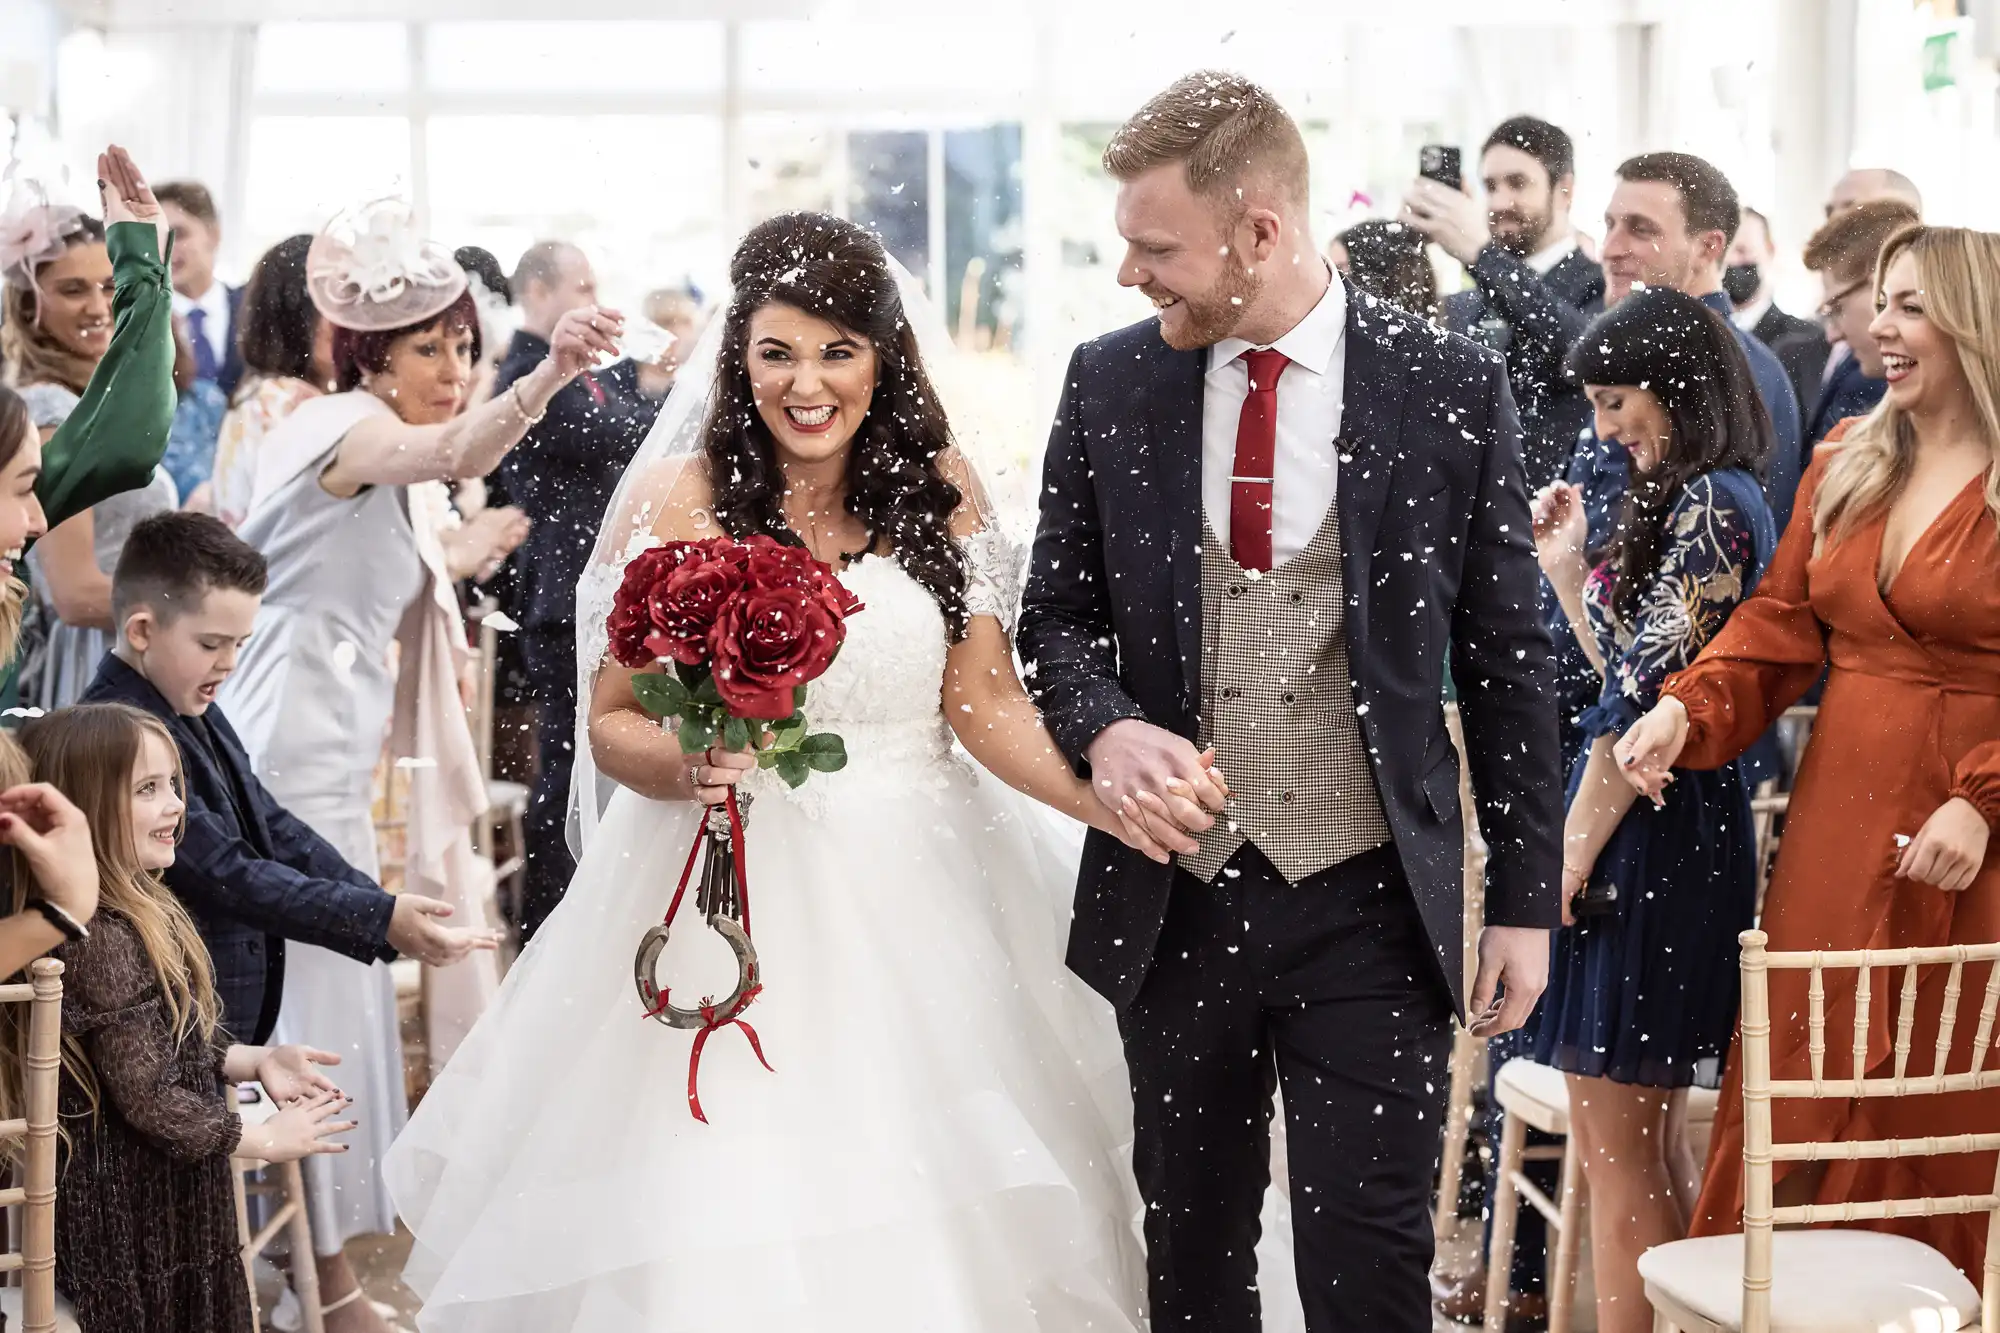 A bride and groom walk down the aisle holding hands, surrounded by guests throwing confetti. The bride carries a bouquet of red flowers.